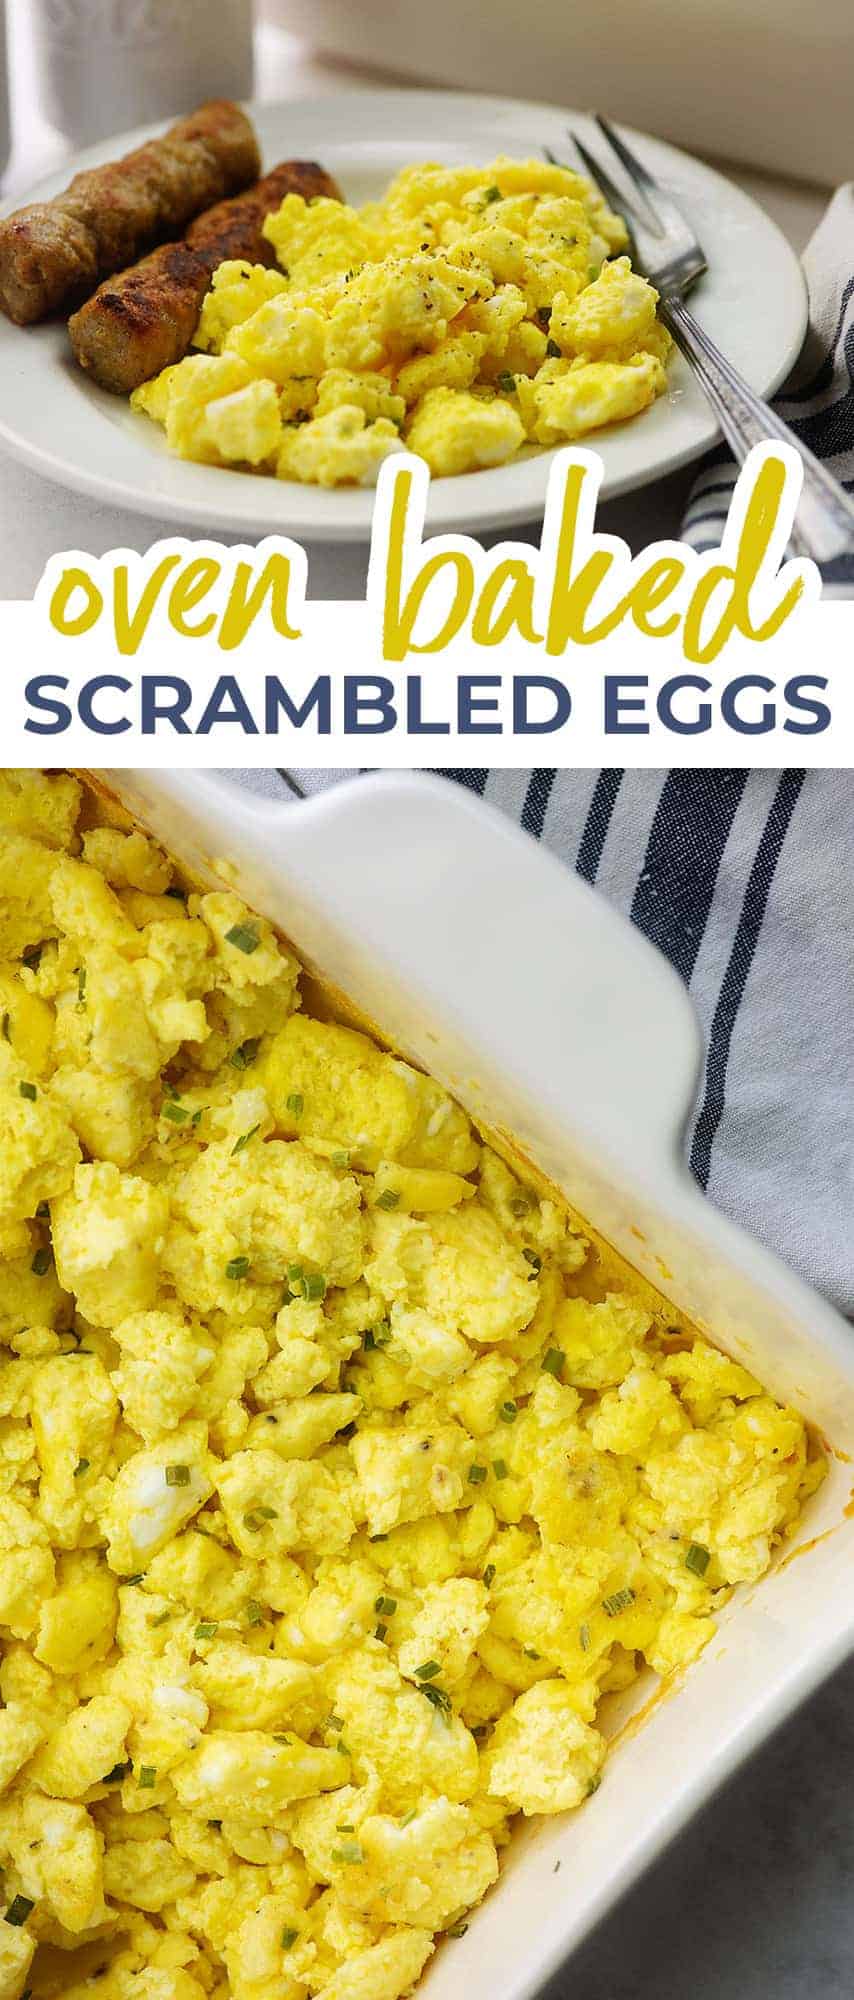 Easy Baked Scrambled Eggs Recipes! - That Low Carb Life